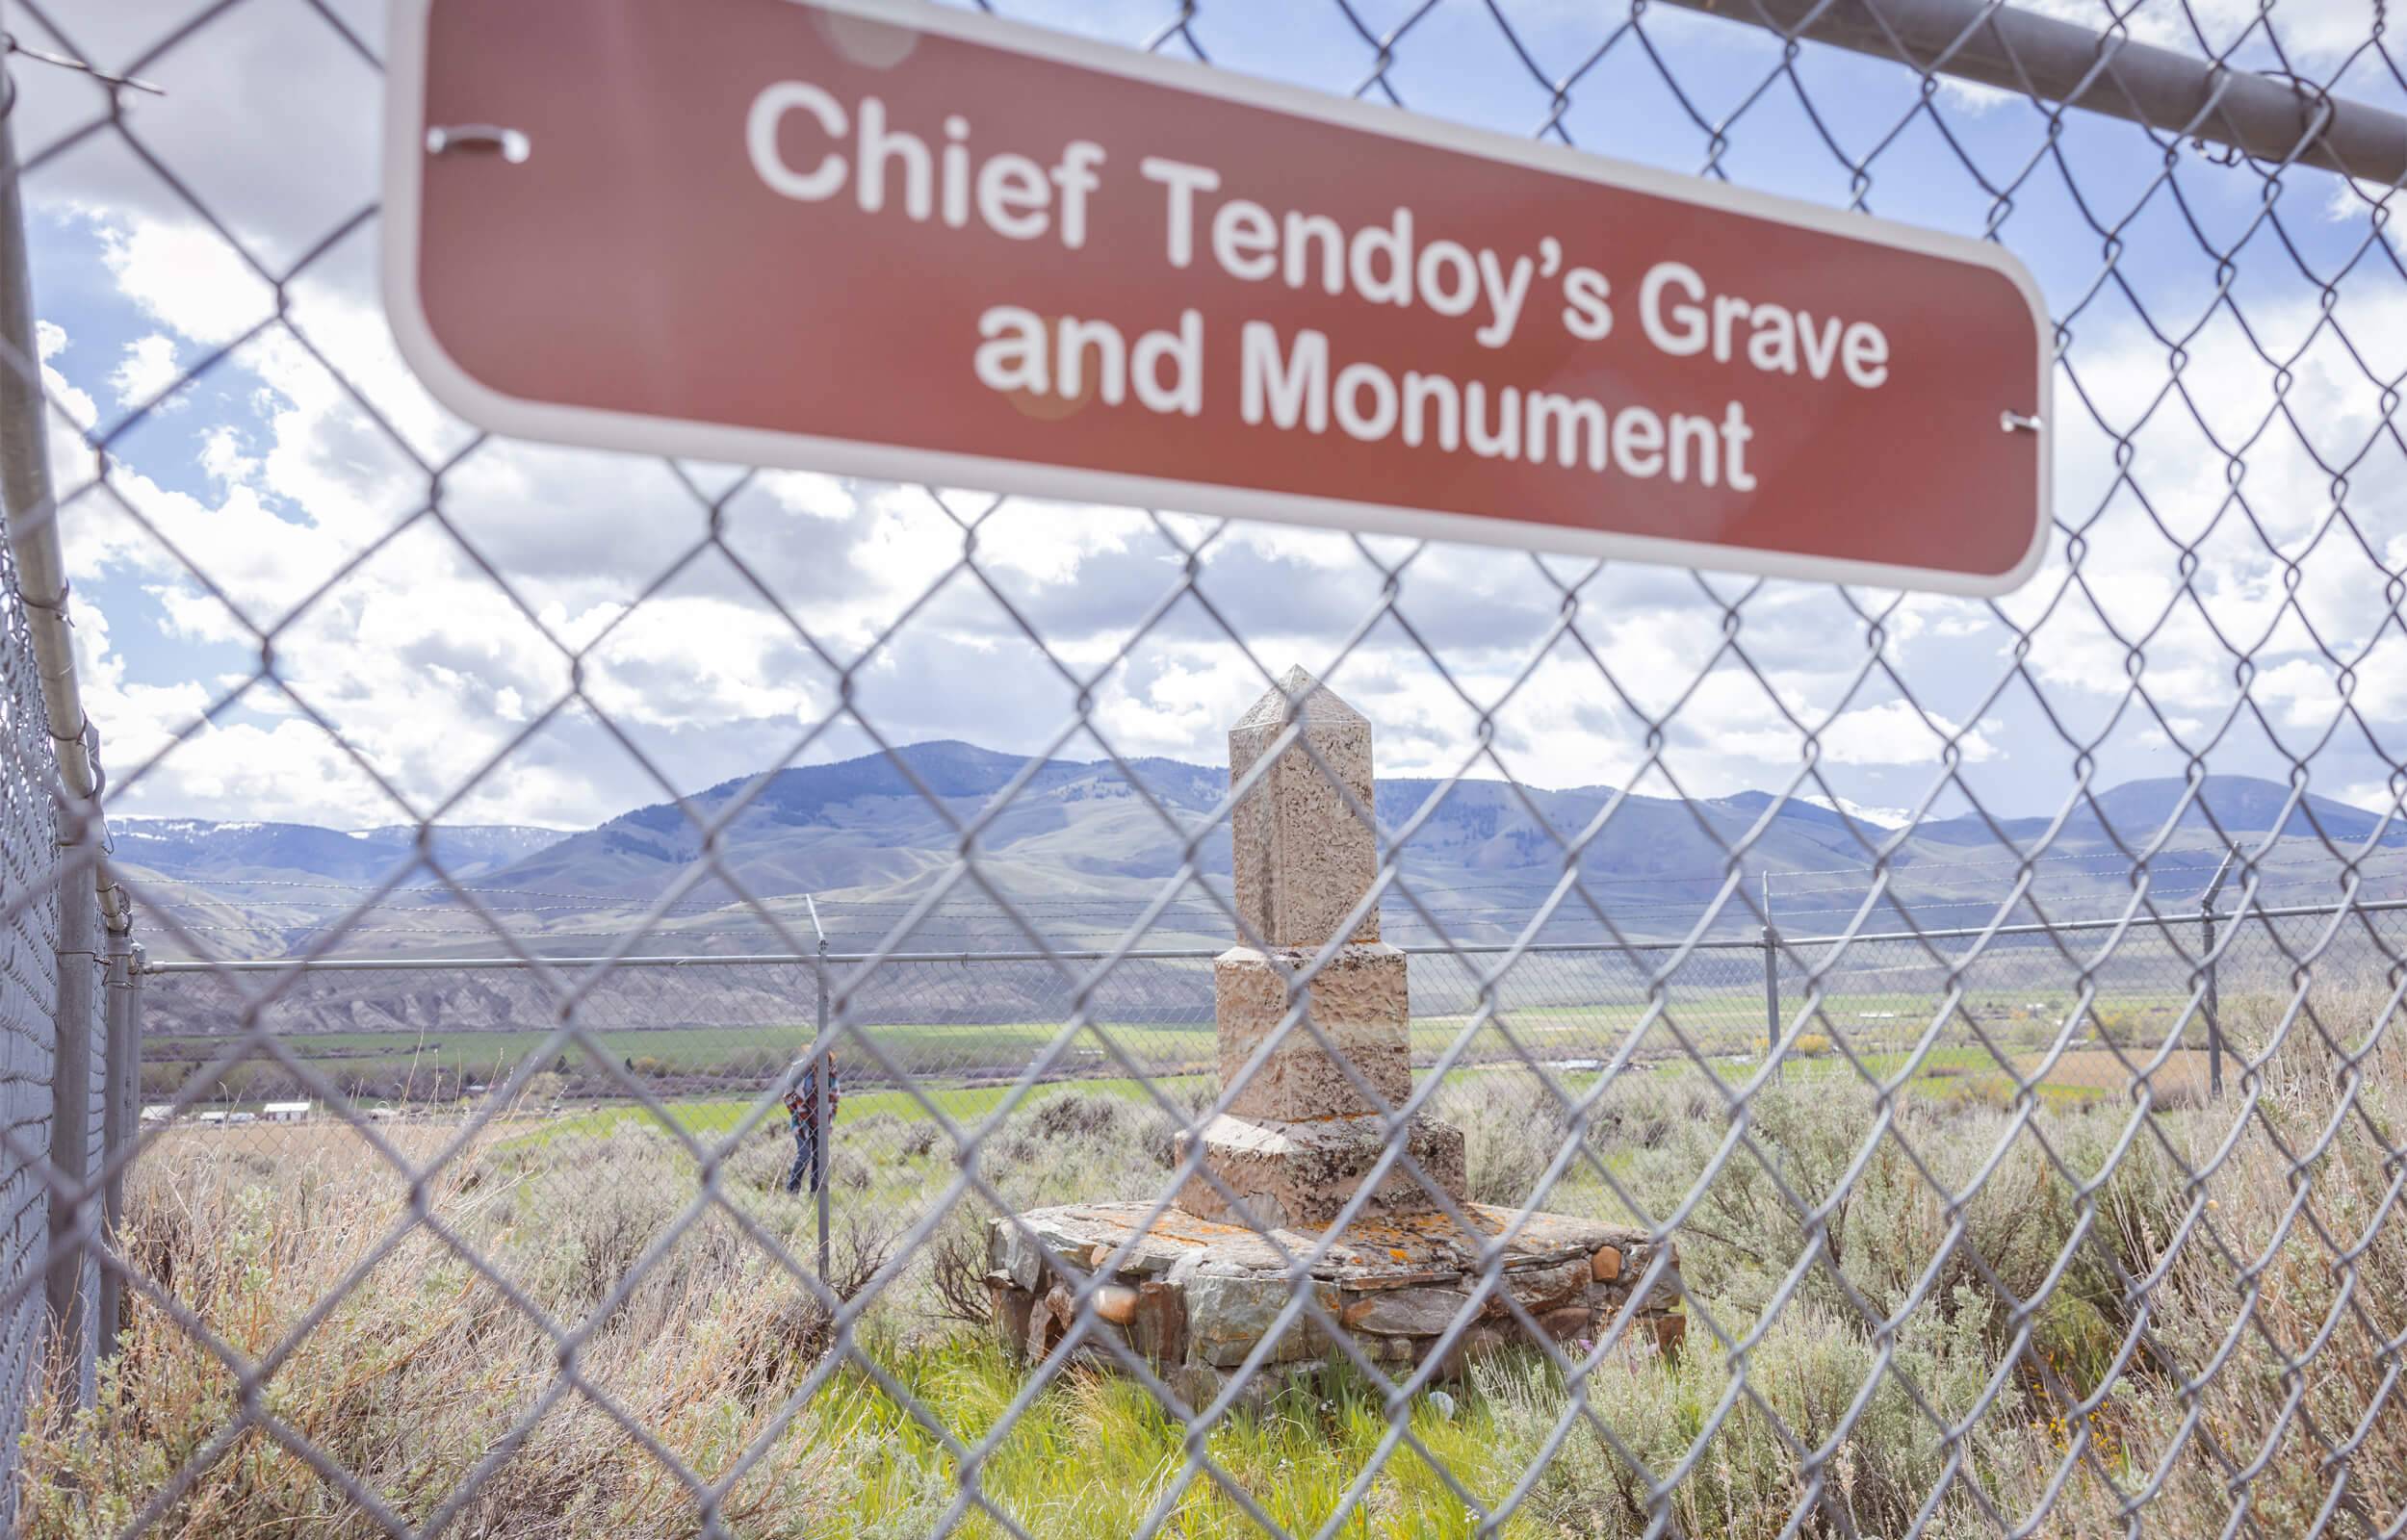 View of the stone Chief Tendoy Grave and Monument from behind a wire fence.